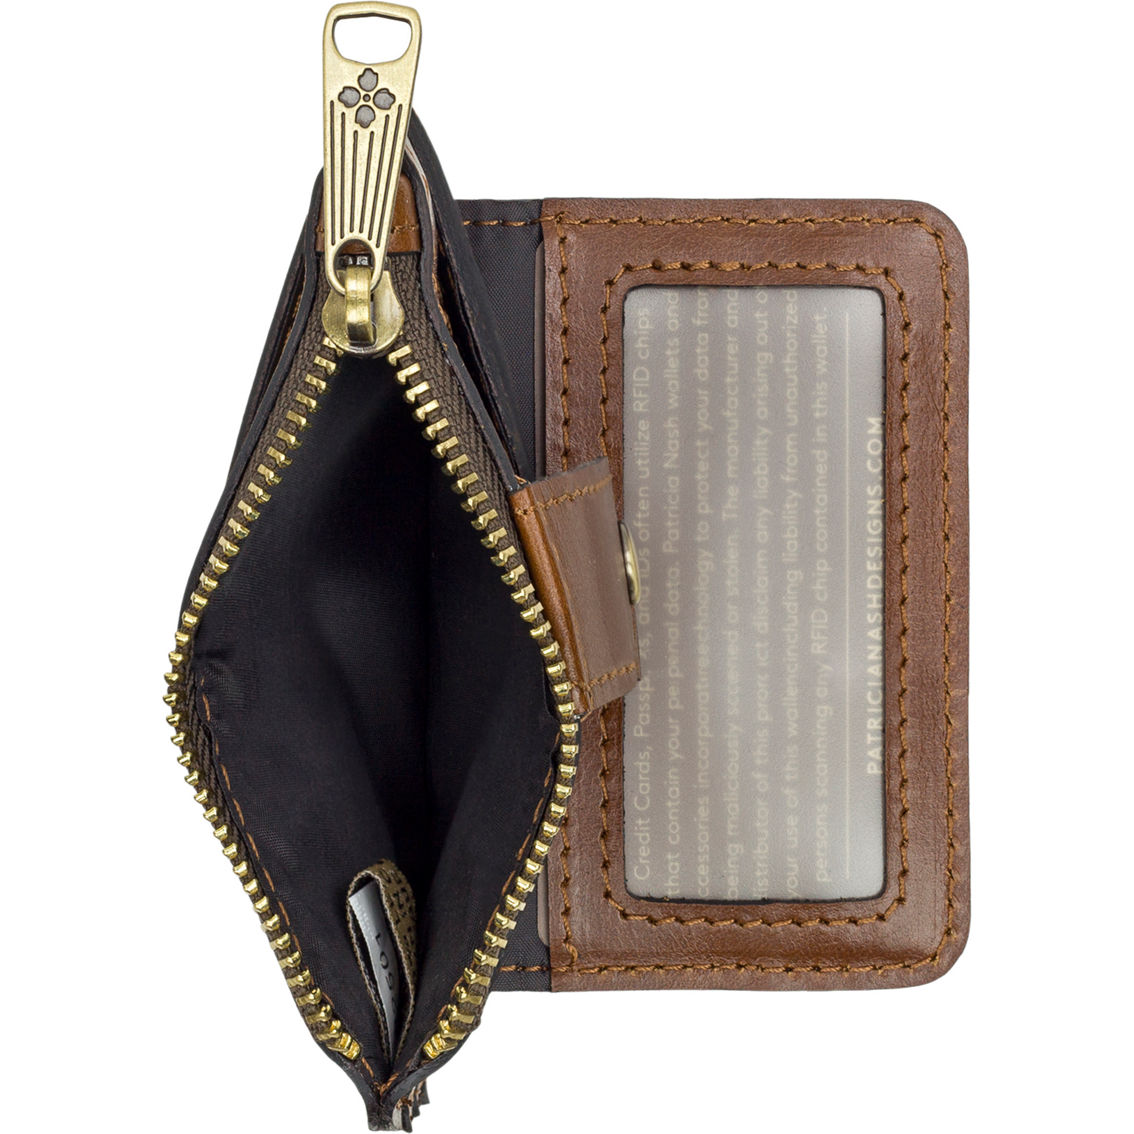 Patricia Nash Cassis ID Wallet - Image 4 of 4